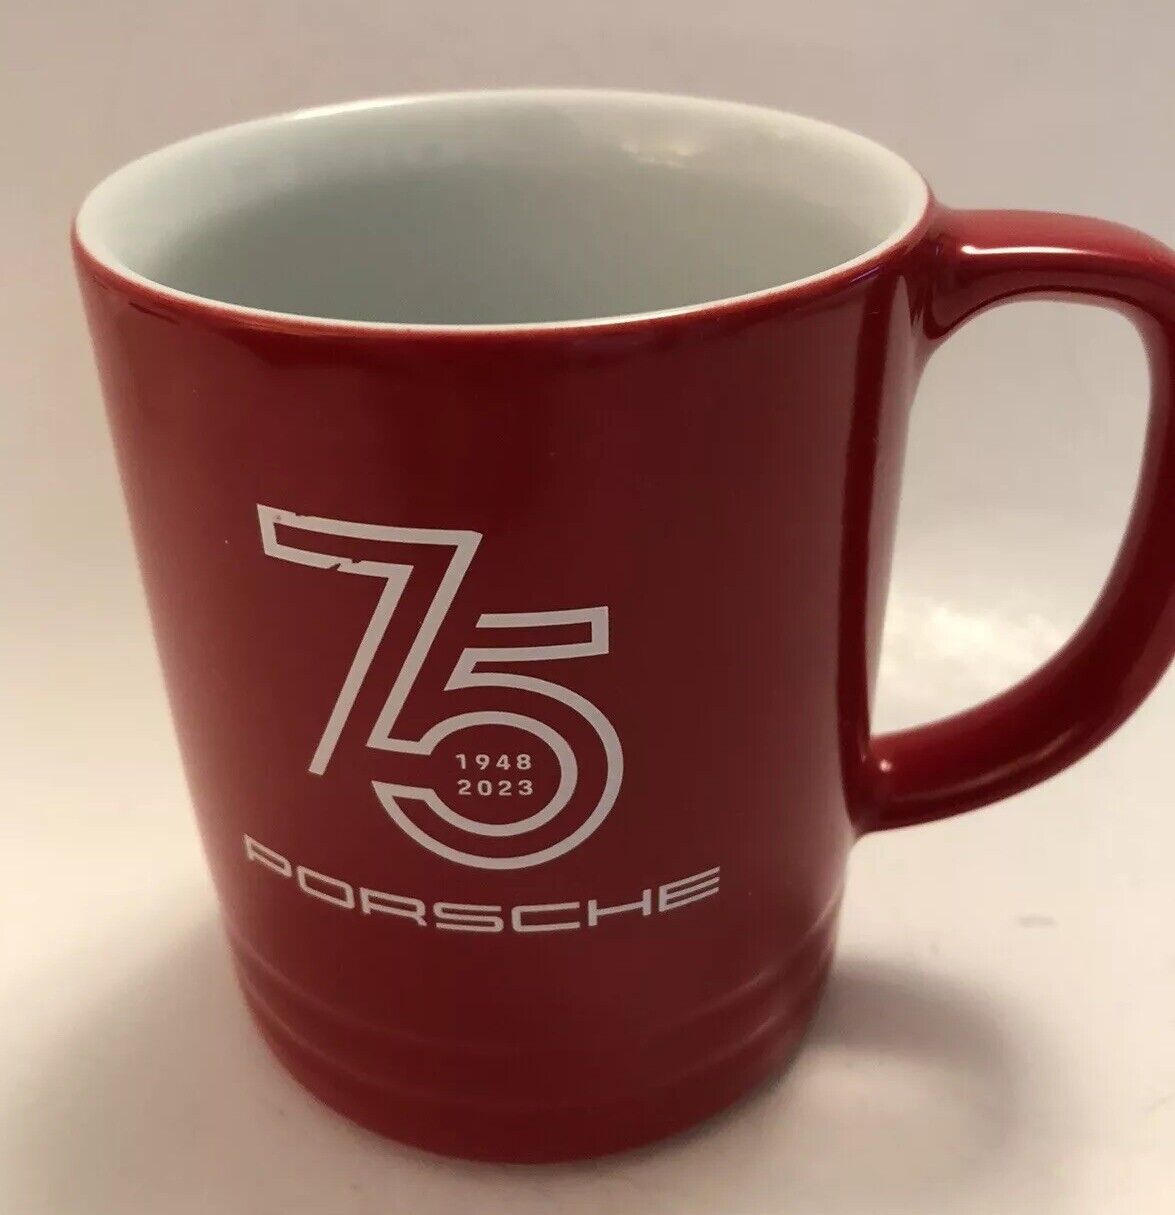 75 Years PORSCHE SPORTS Cars Collection Coffee Mug Cup 14 oz Limited Edition